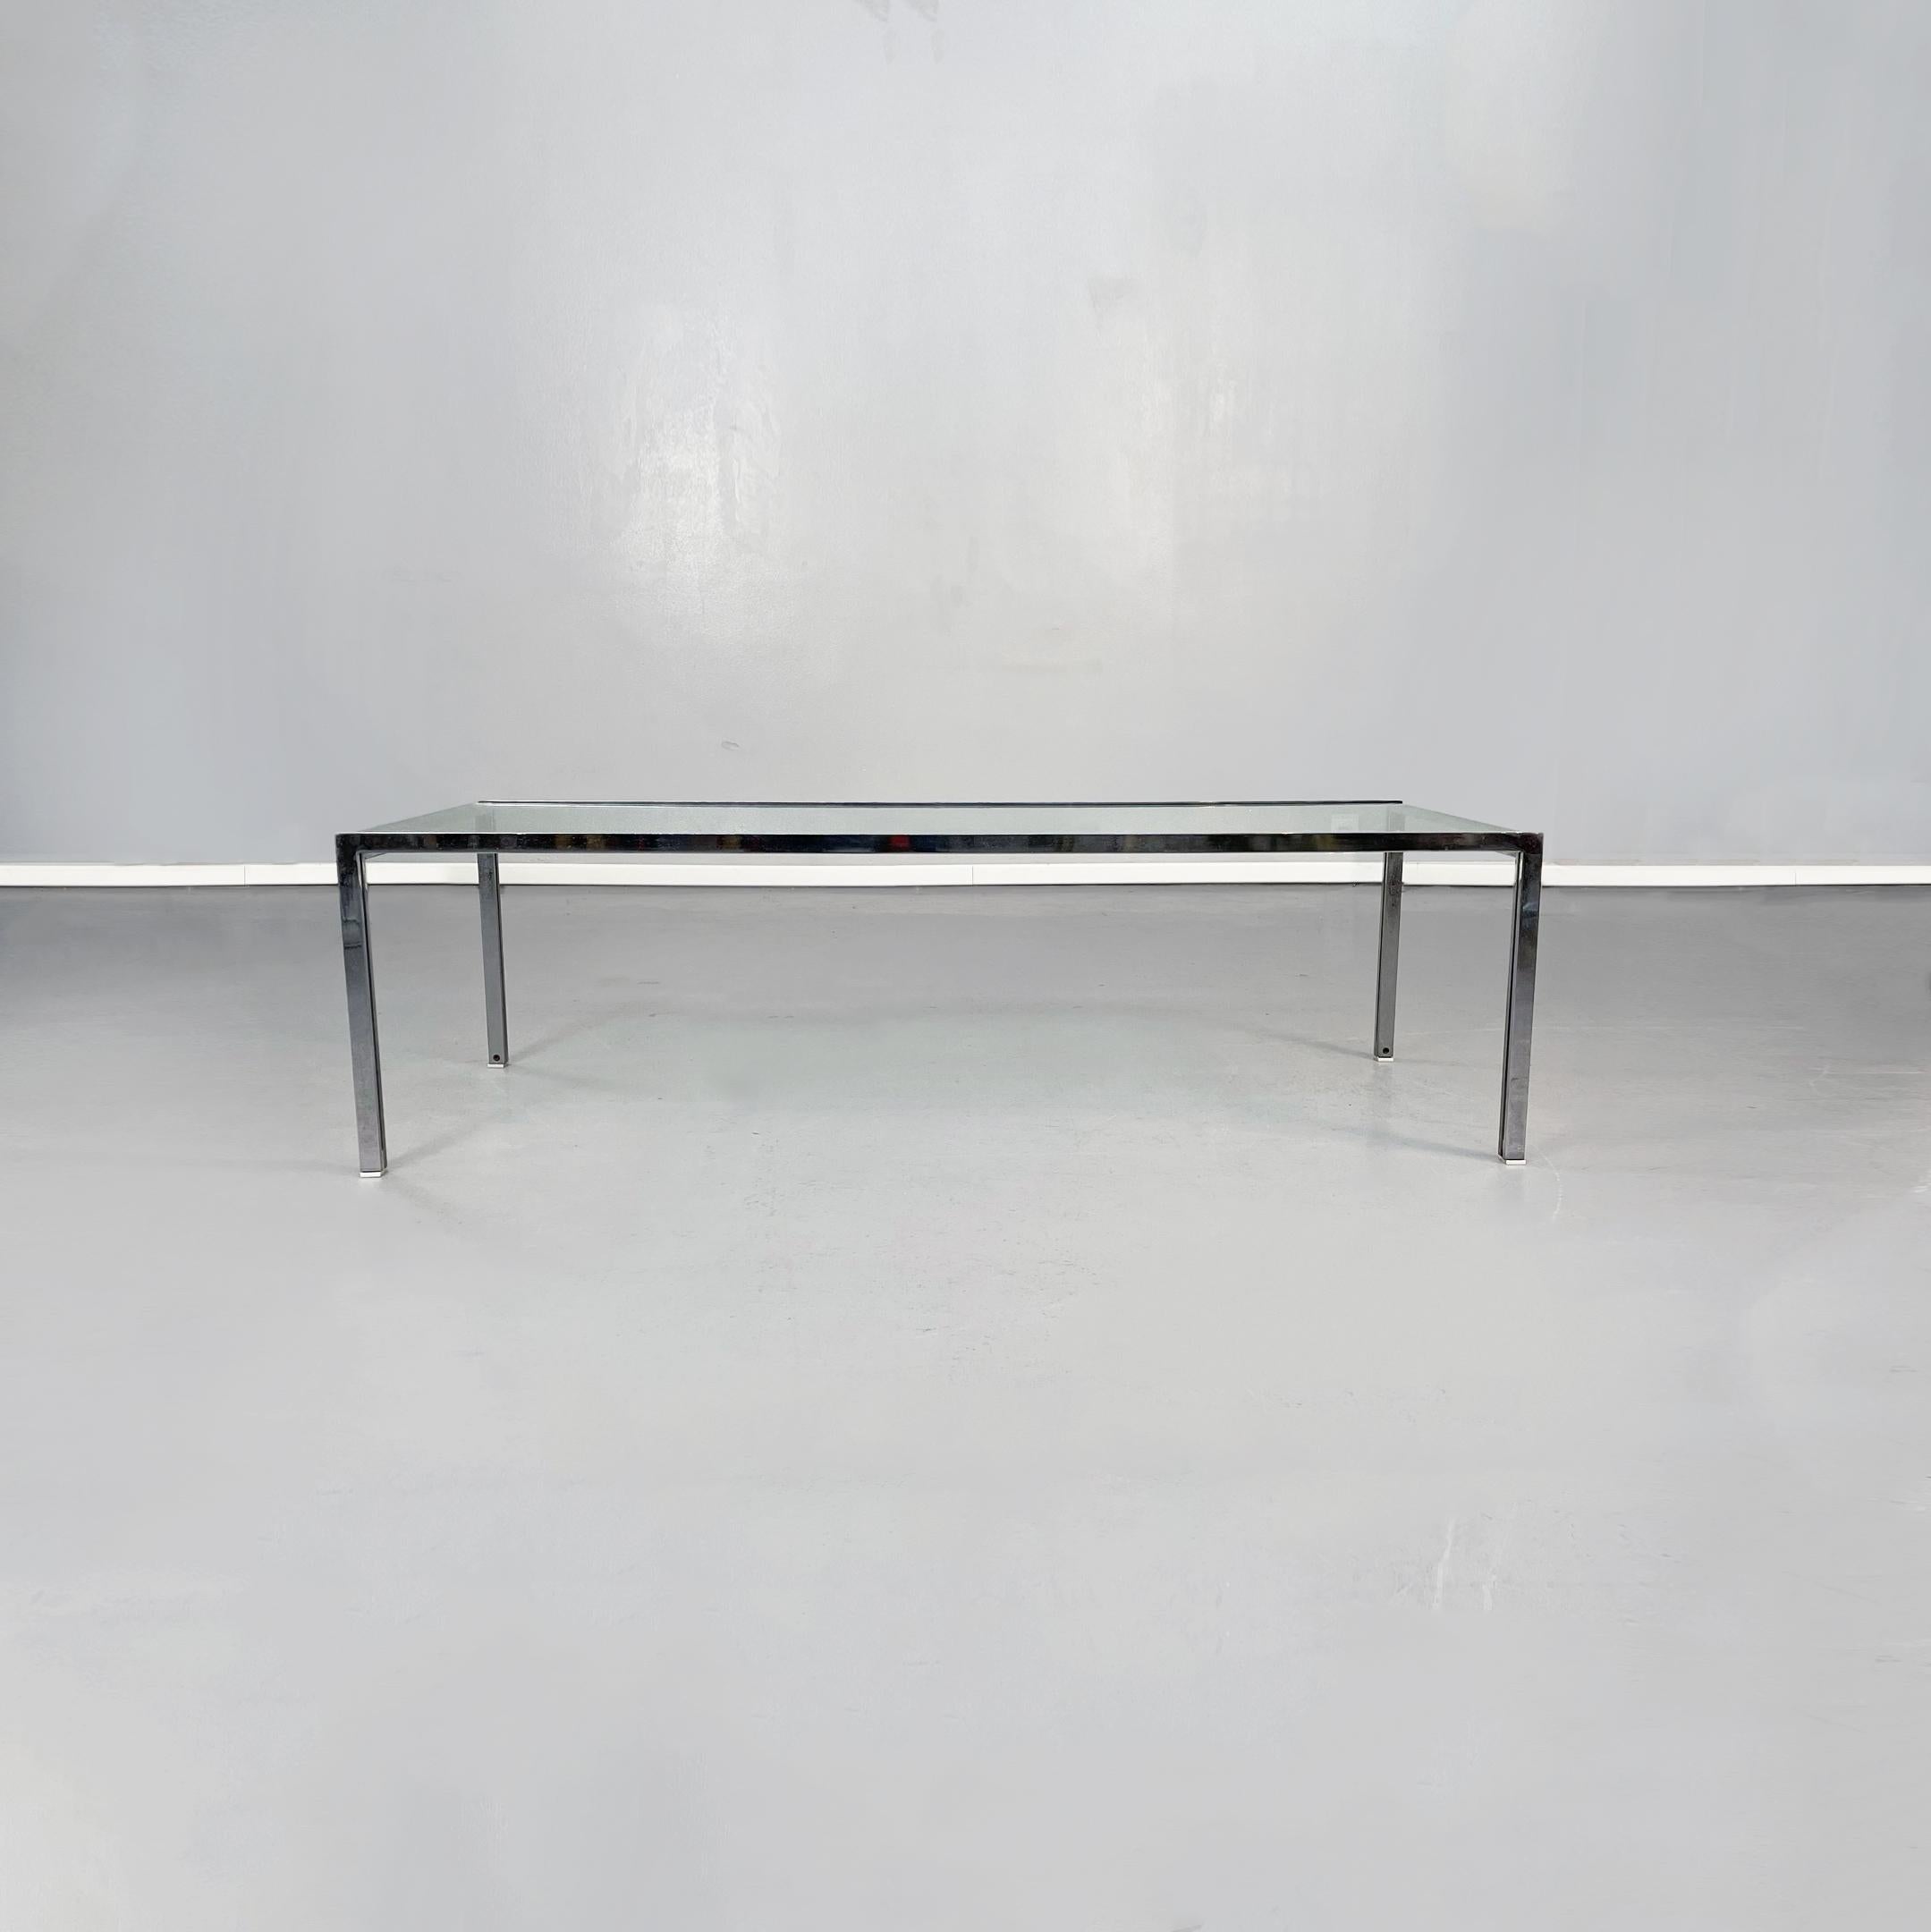 American mid-century glass and steel Luar coffee table by Ross Littell, 1970s. 
Luar coffee table with rectangular light blue glass top resting on the steel structure. The legs have a groove.
Designed by Ross Littell in 1970s.
Very good